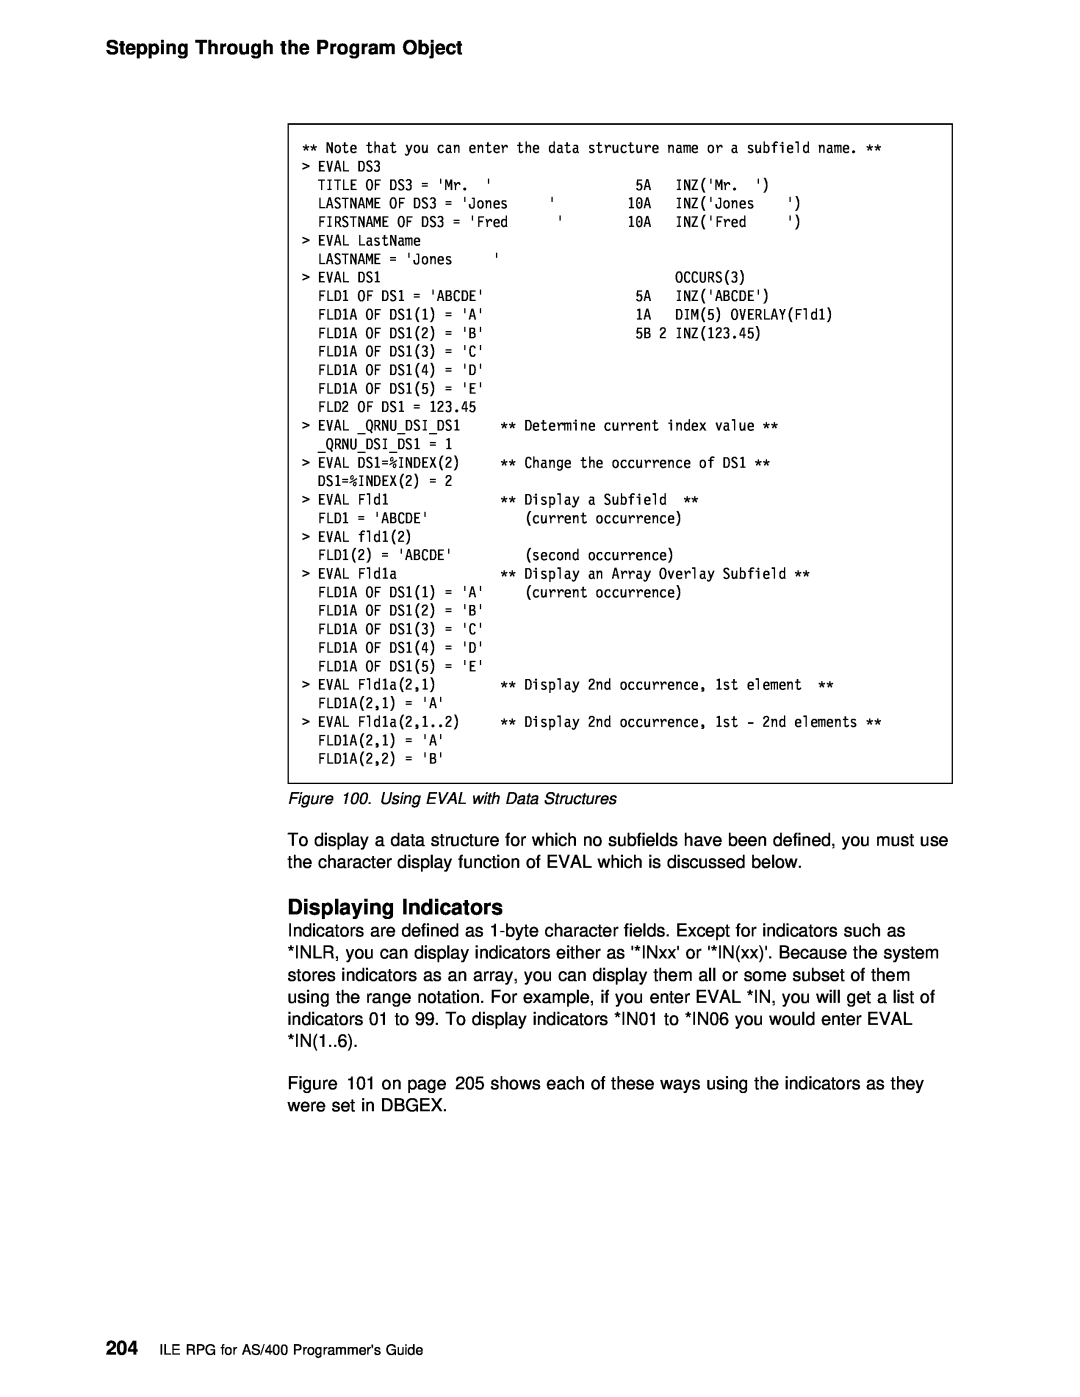 IBM AS/400 manual Displaying Indicators, Stepping Through the Program Object, Using EVAL with Data Structures 